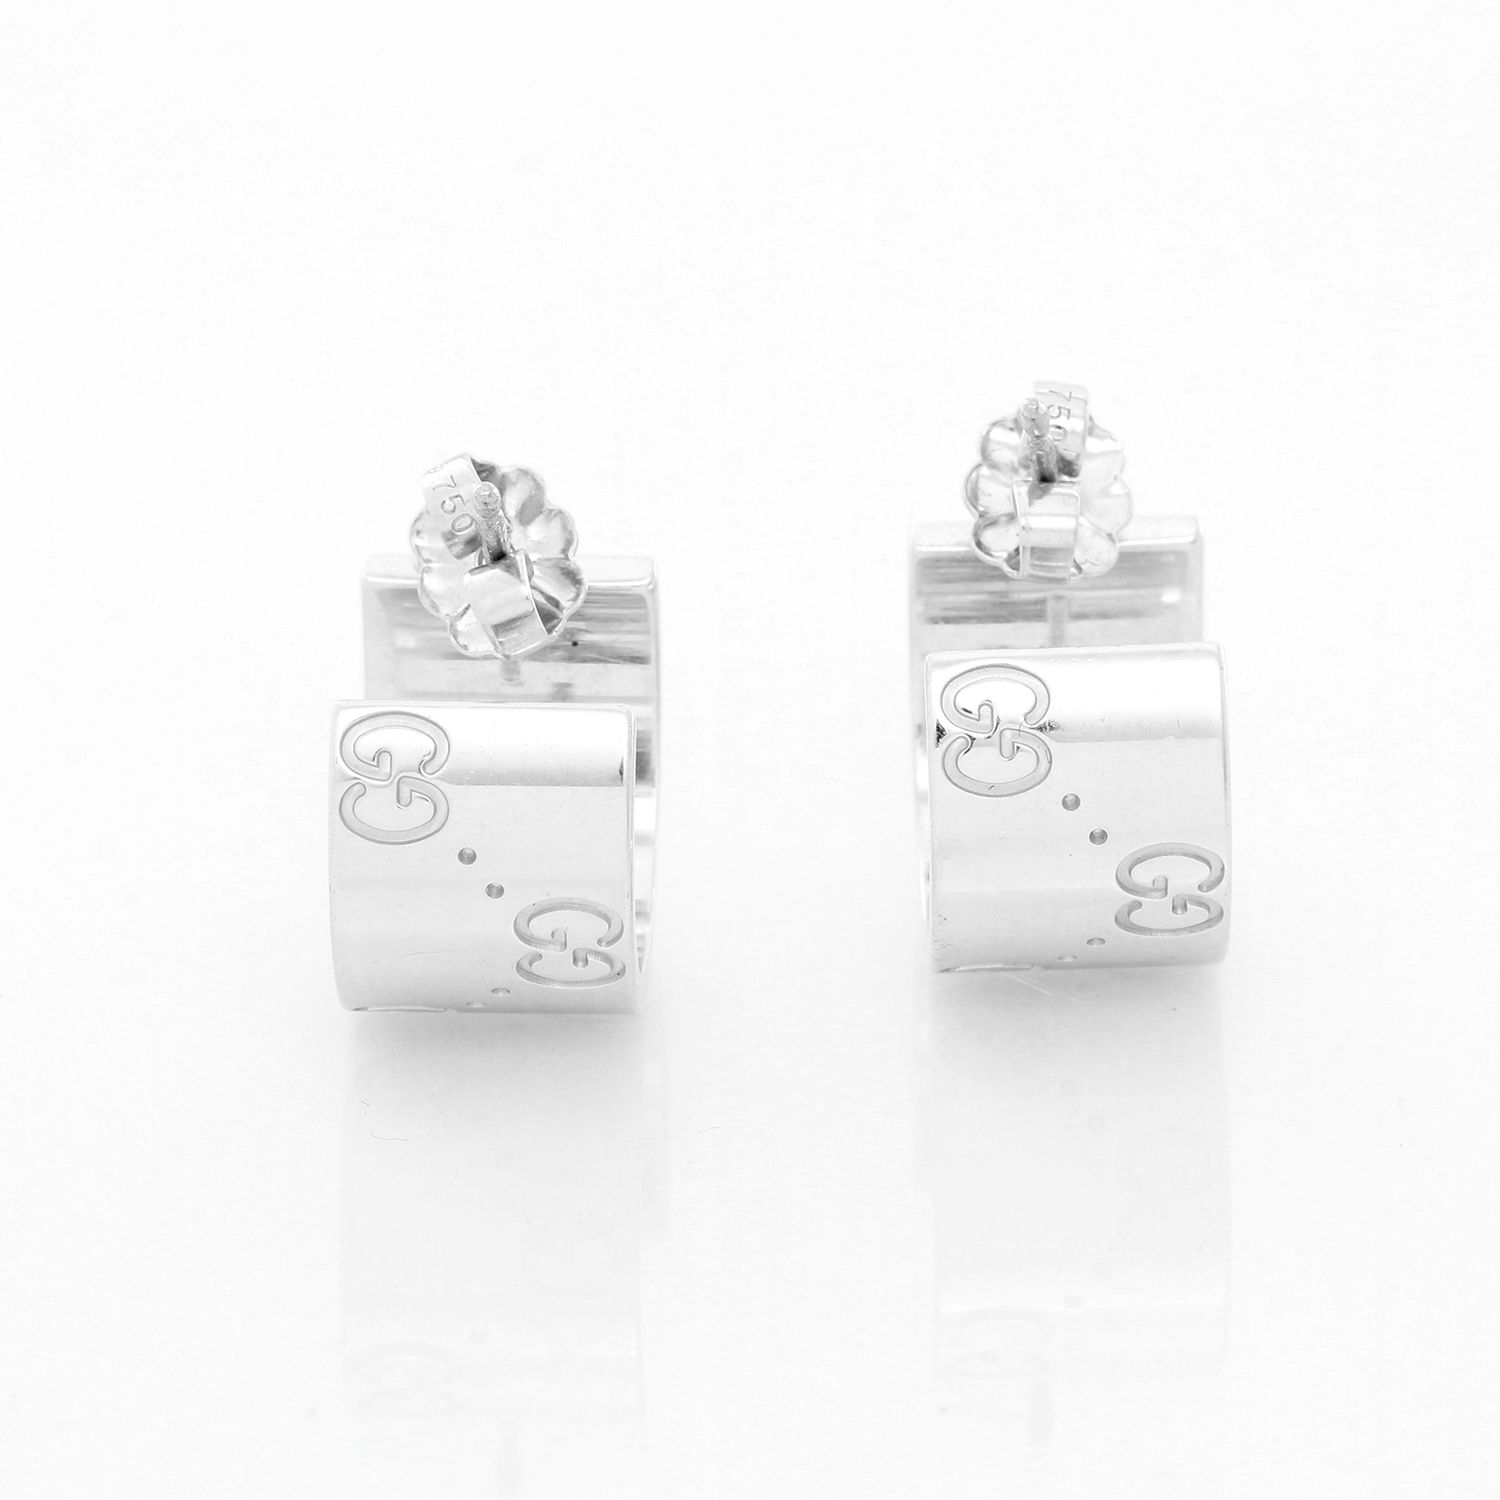 Mahi Combo of Small Stud Earrings with White Crystals for Women (CO110